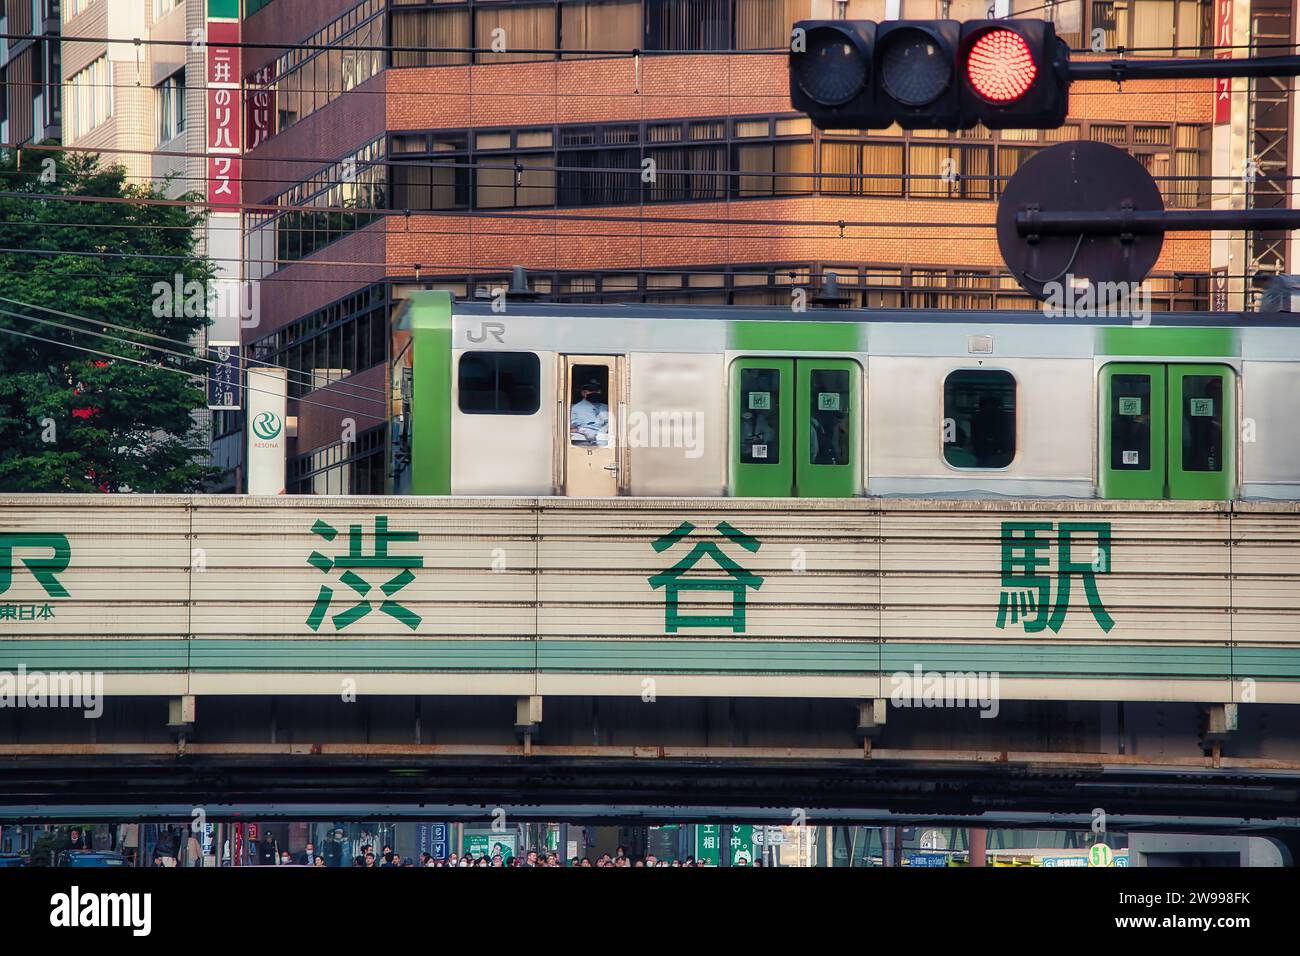 Photo of the back cabin of the famous Yamanote Line passing on the Shibuya Station bridge just before entering the Shibuya Station. Stock Photo